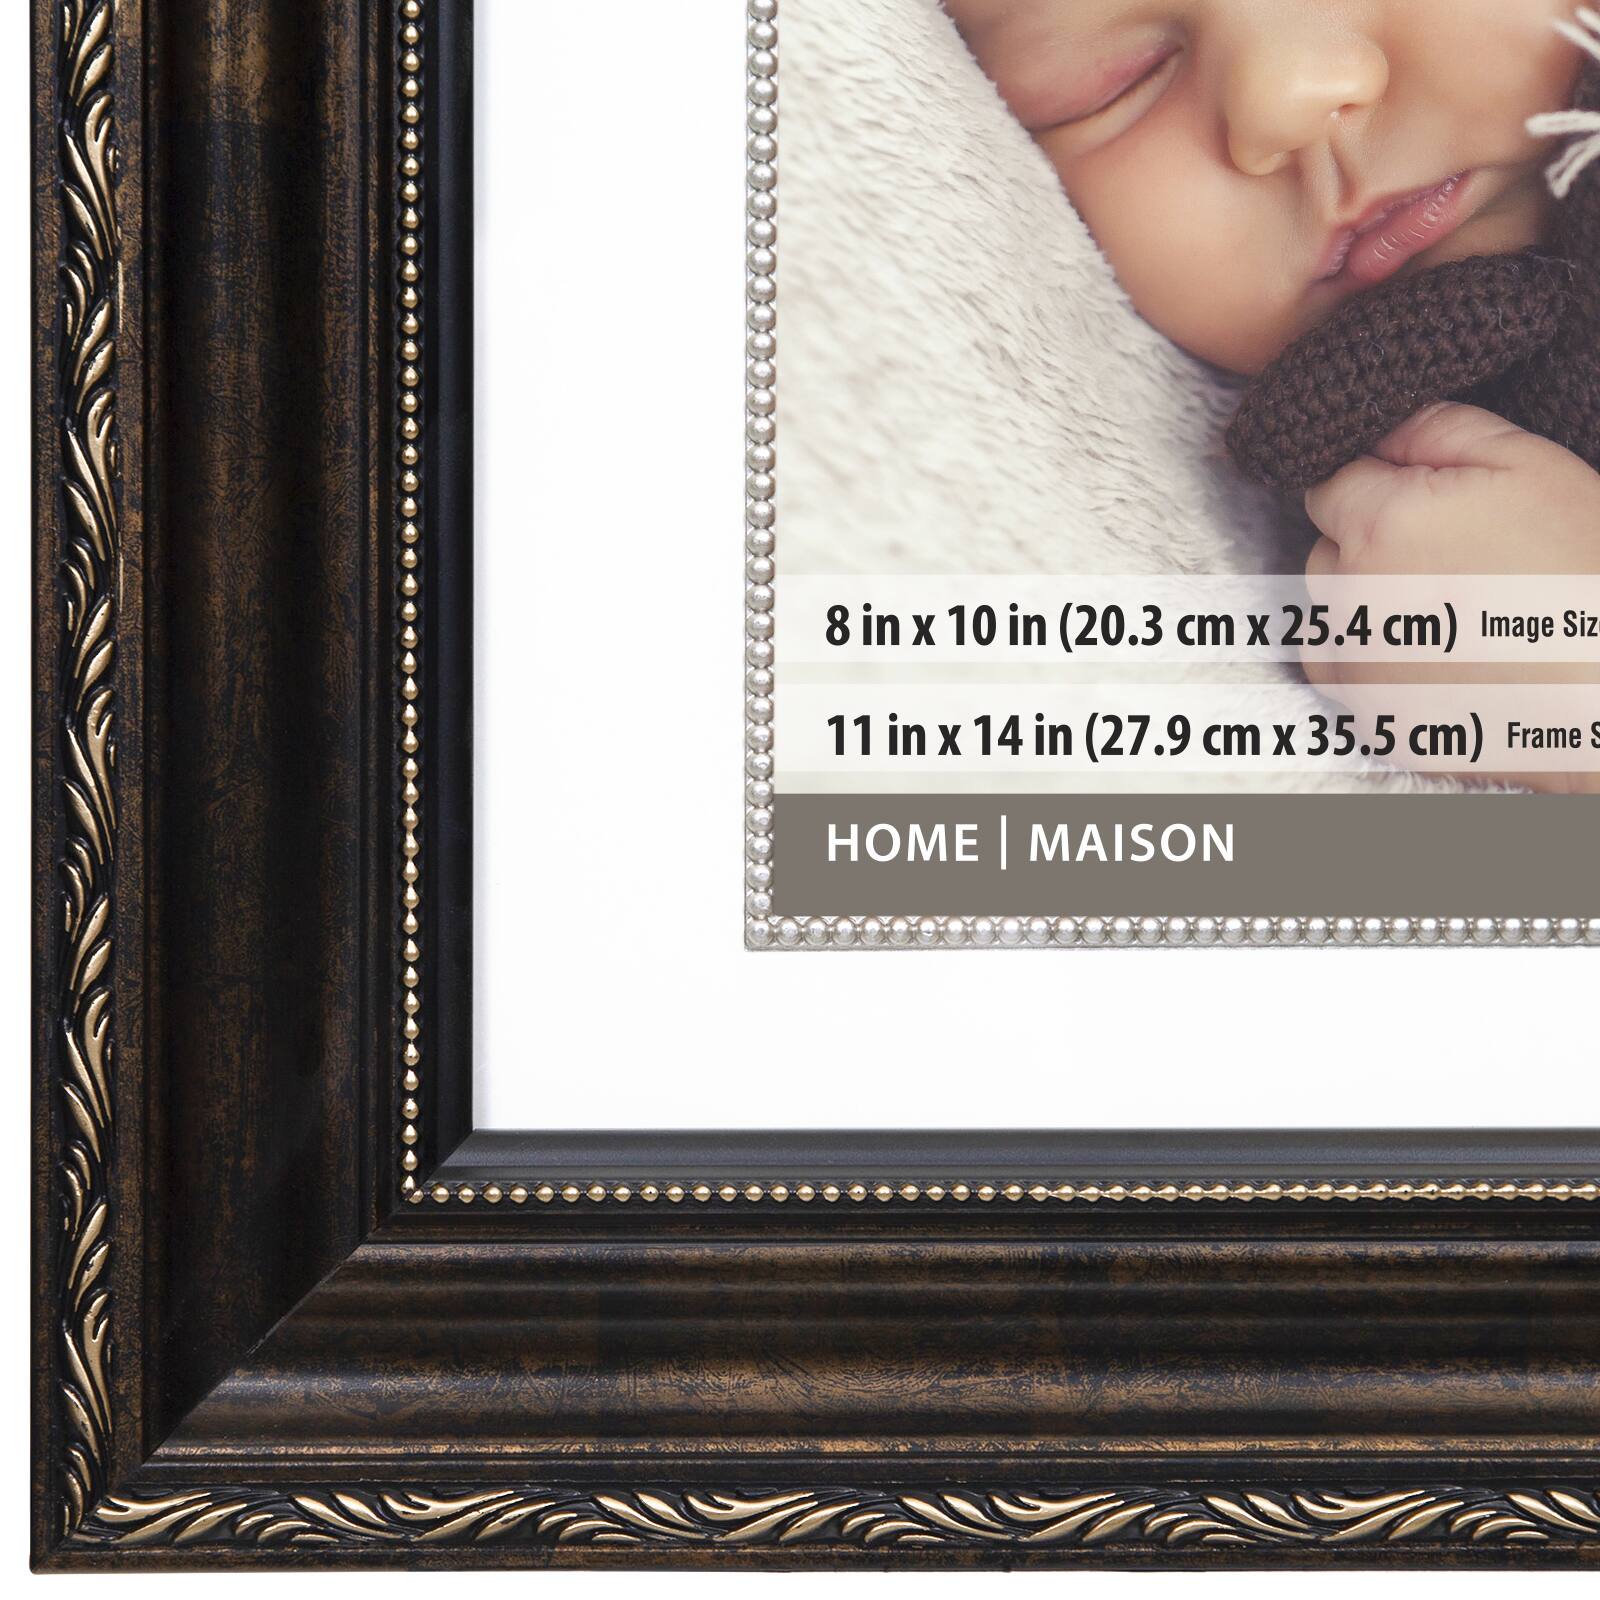 Shop for the Bronze Ornate Frame, 11" x 14" With 8" x 10" Mat, Home